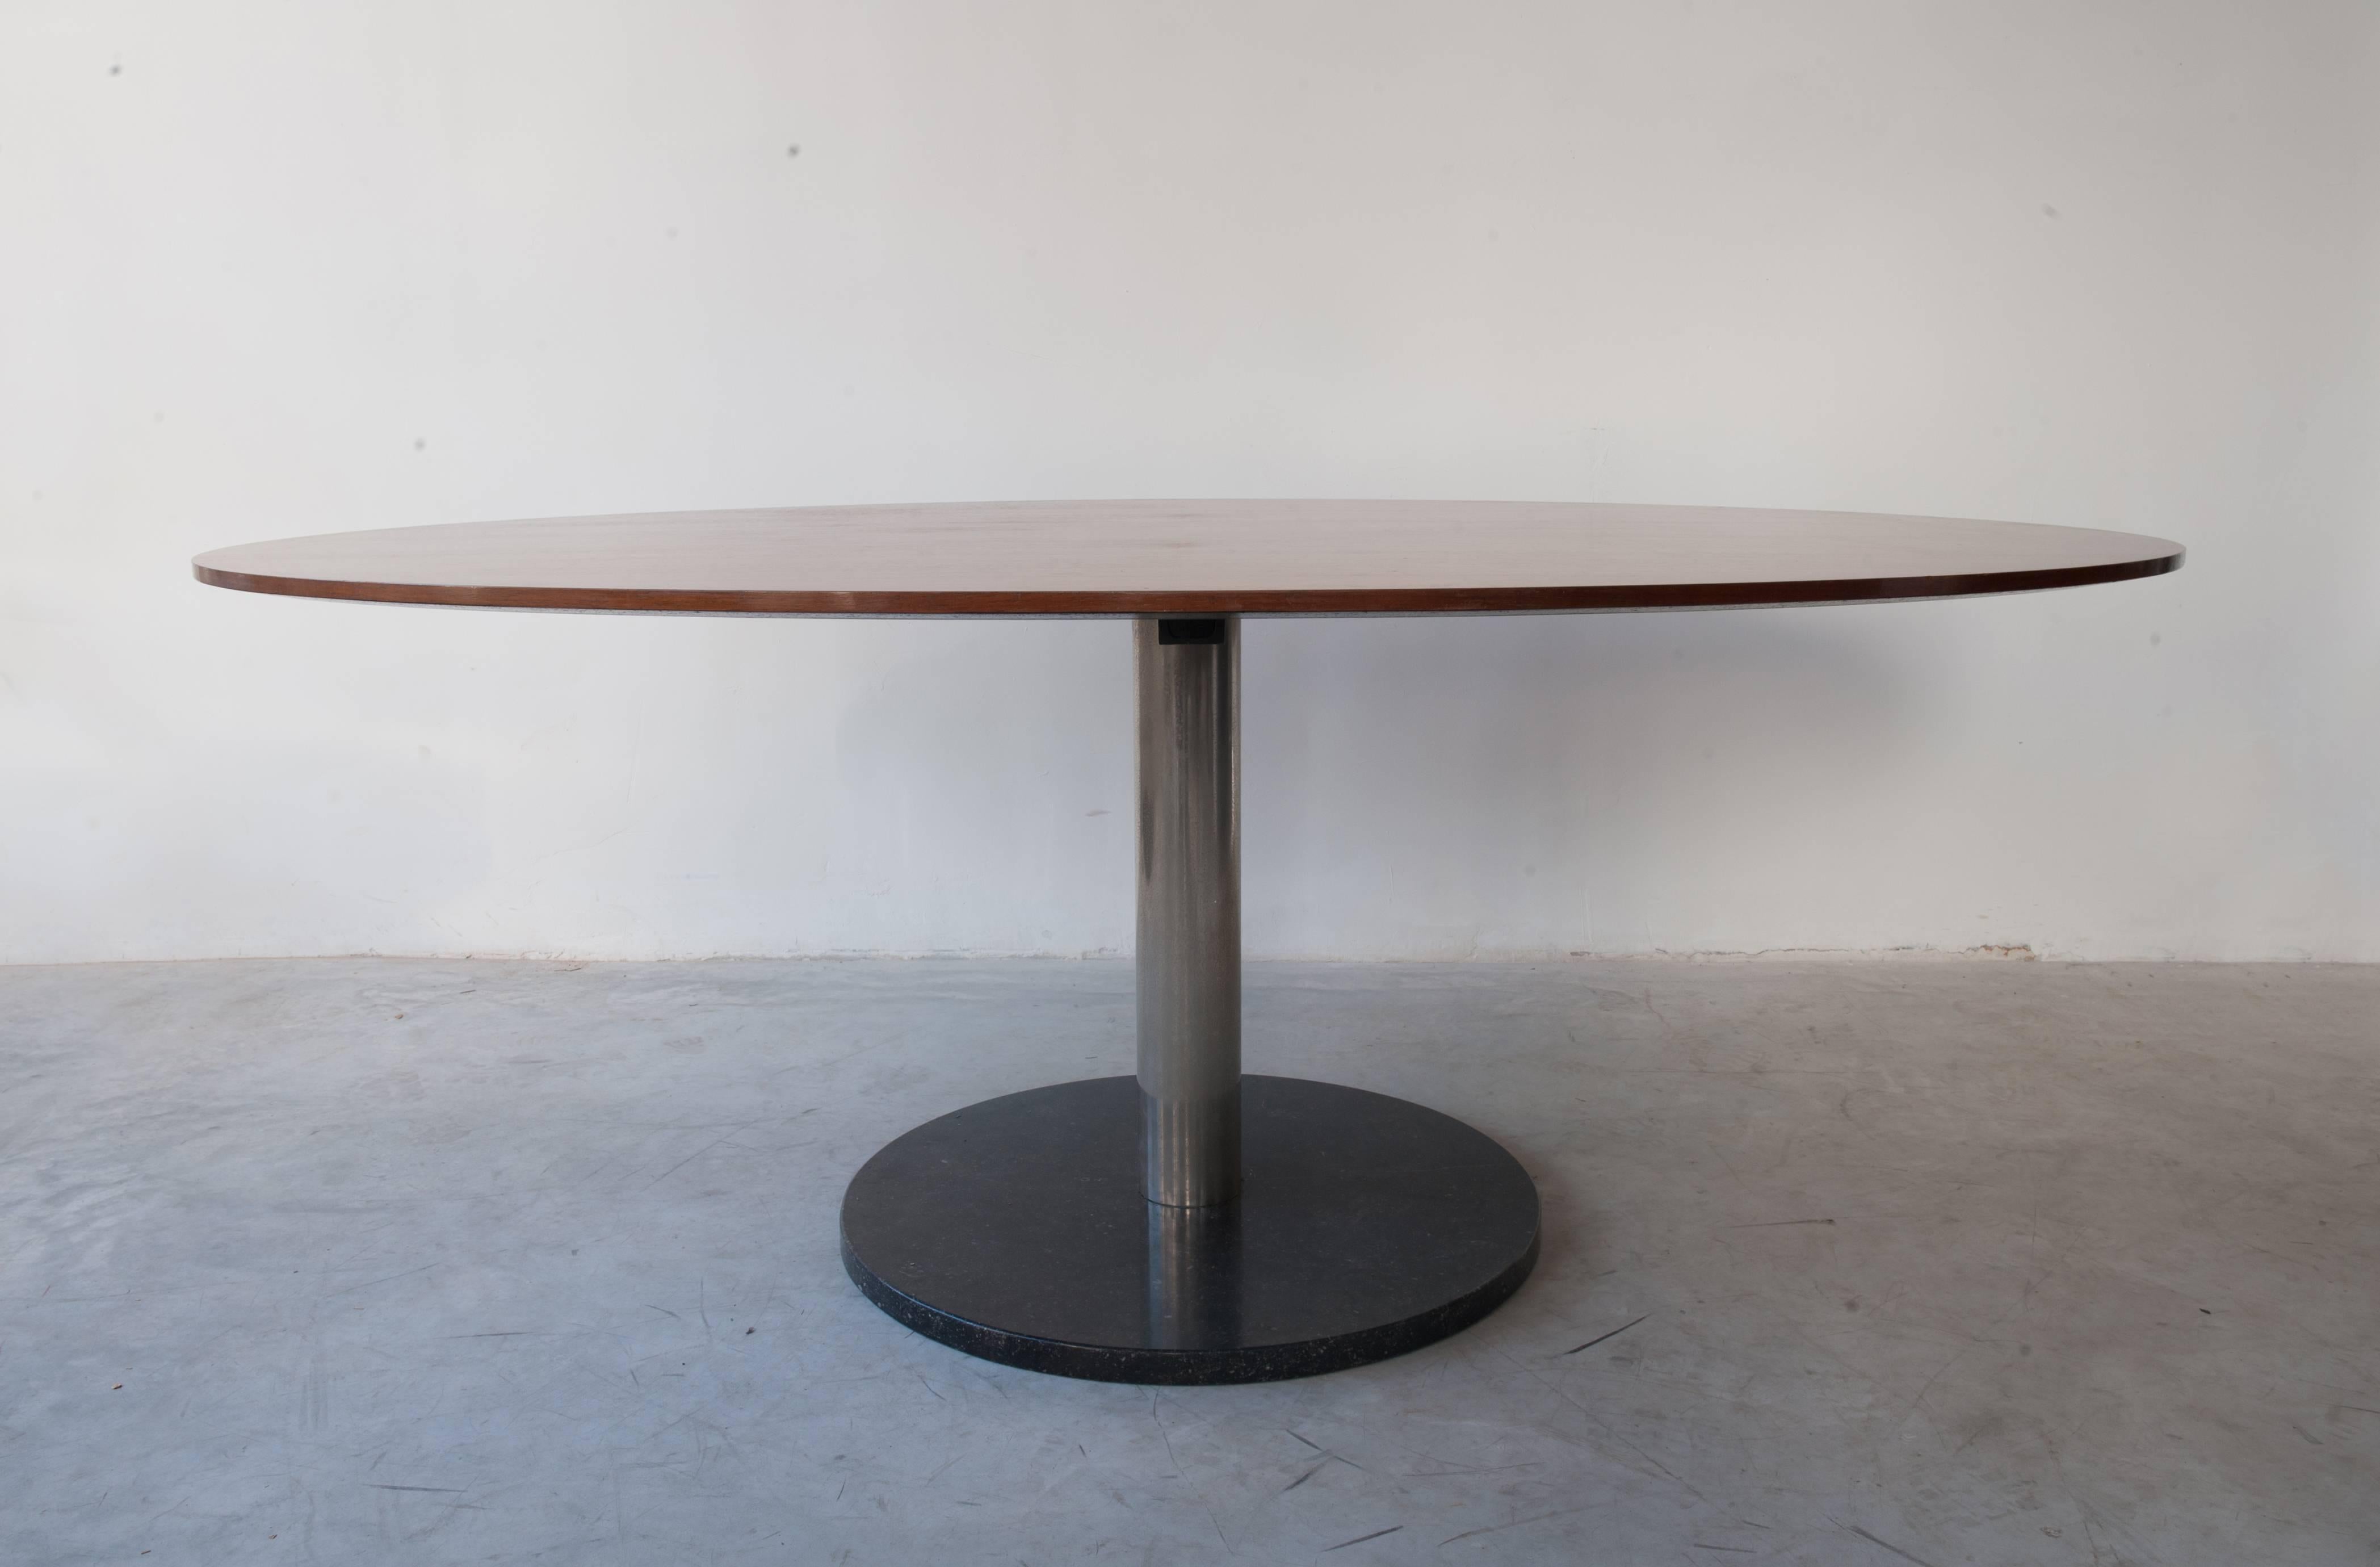 Dining table in walnut, chrome tube, and black marble base by Alfred Hendrickx for Belform, Belgium, 1960s.
Oval shaped dining room table featuring a beautiful grain in the walnut veneer on an chromed frame and black marble base. This table is